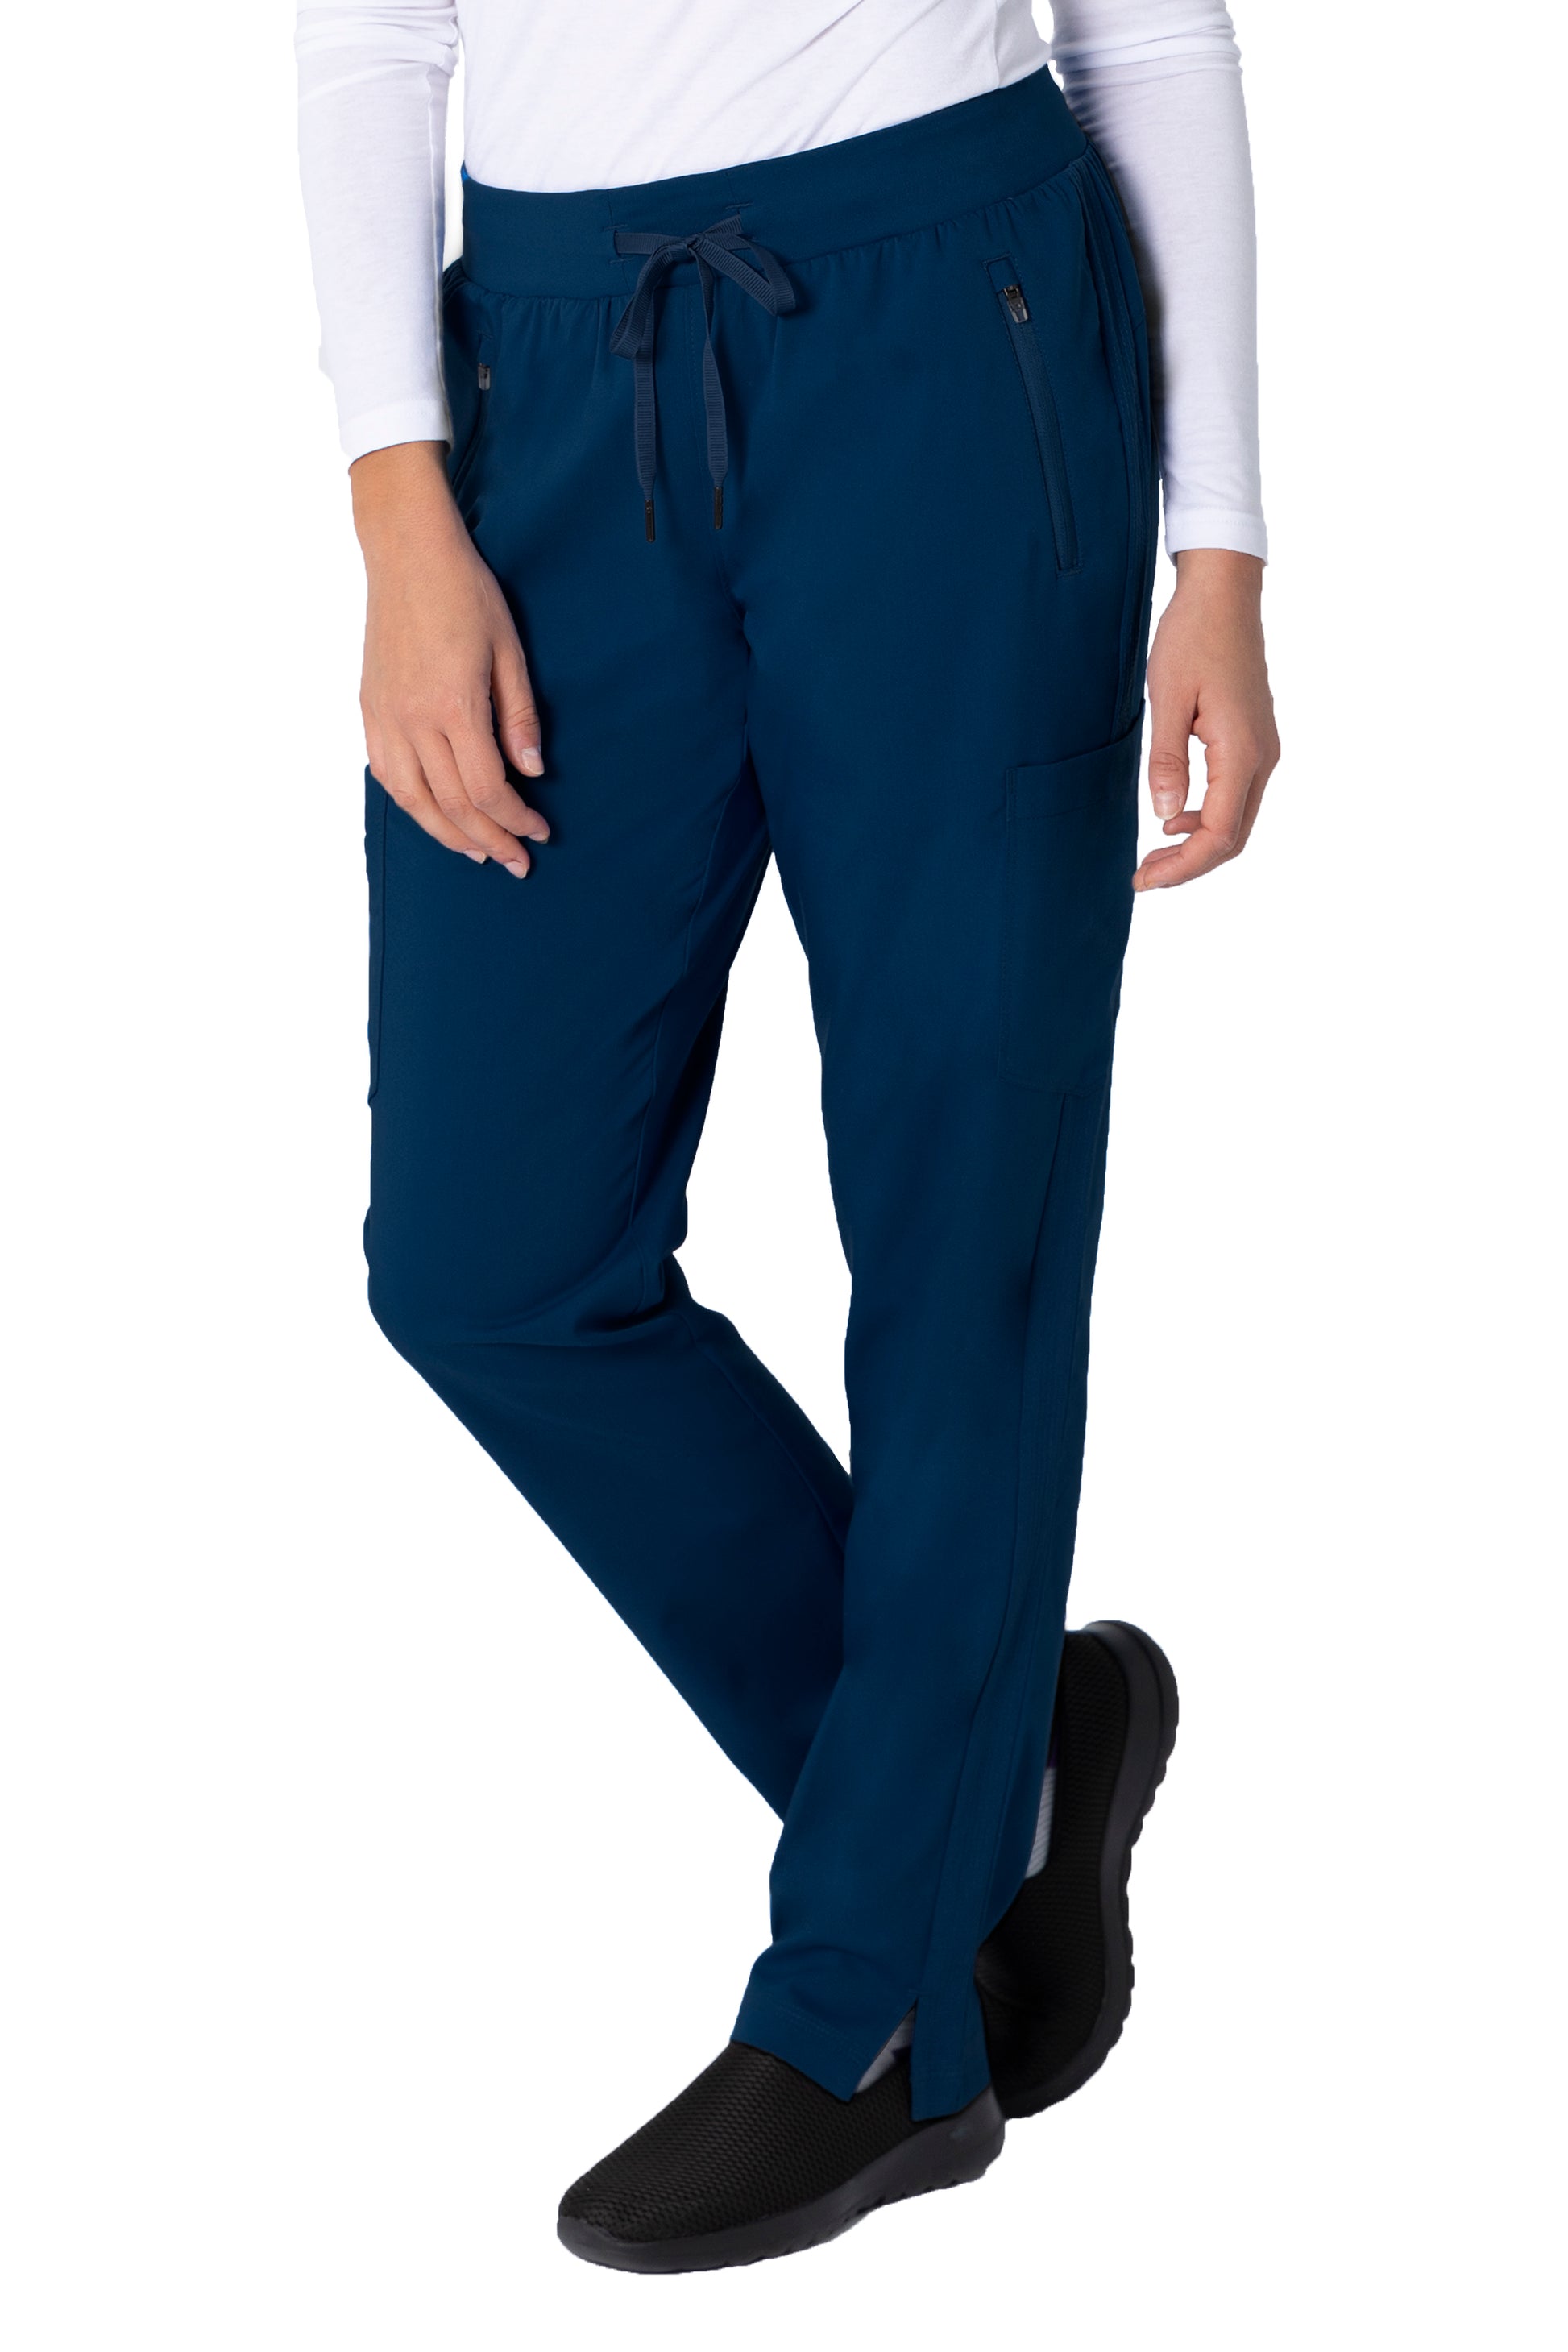 Healing Hands Purple Label Toni Yoga Petite Scrub Pant in Navy at Parker's Clothing and Shoes.